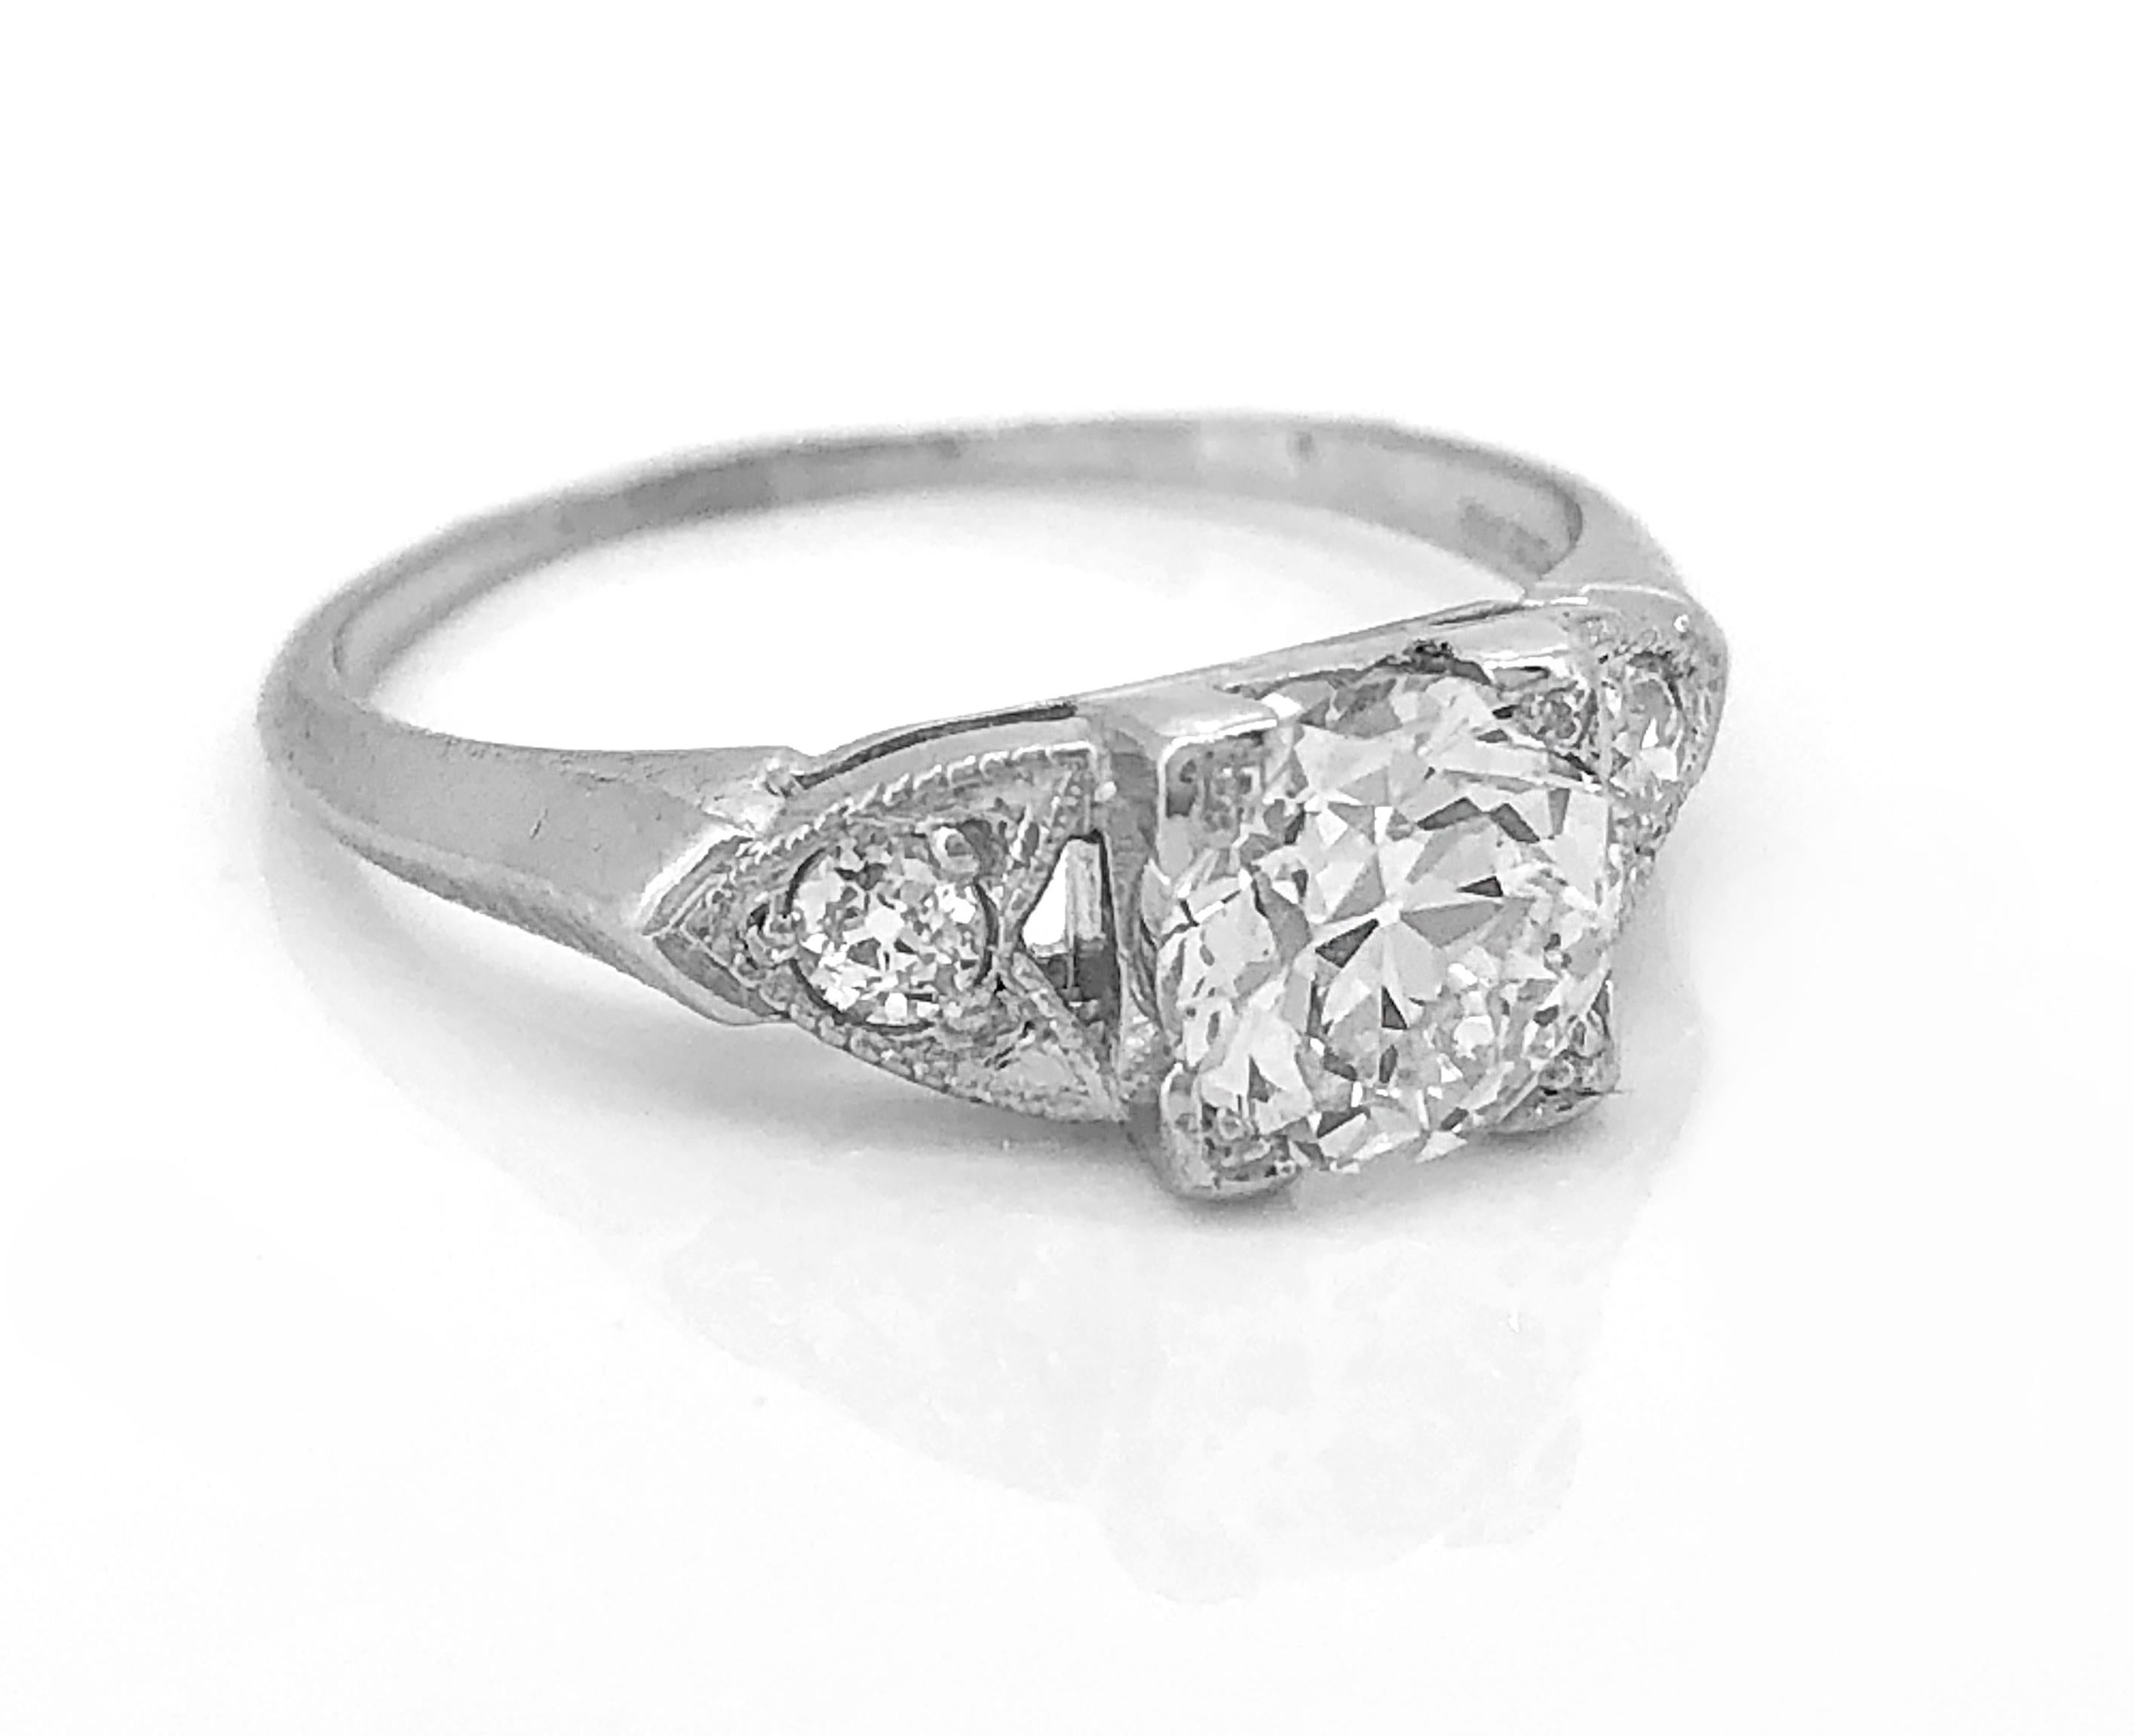 A sophisticated and timeless Art Deco .92ct. diamond Antique Engagement Ring features a European cut center stone with I1 clarity (eye clean) and bright white G color. The accenting European cut diamonds weigh .12ct. apx. T.W. with VS2-SI1 clarity